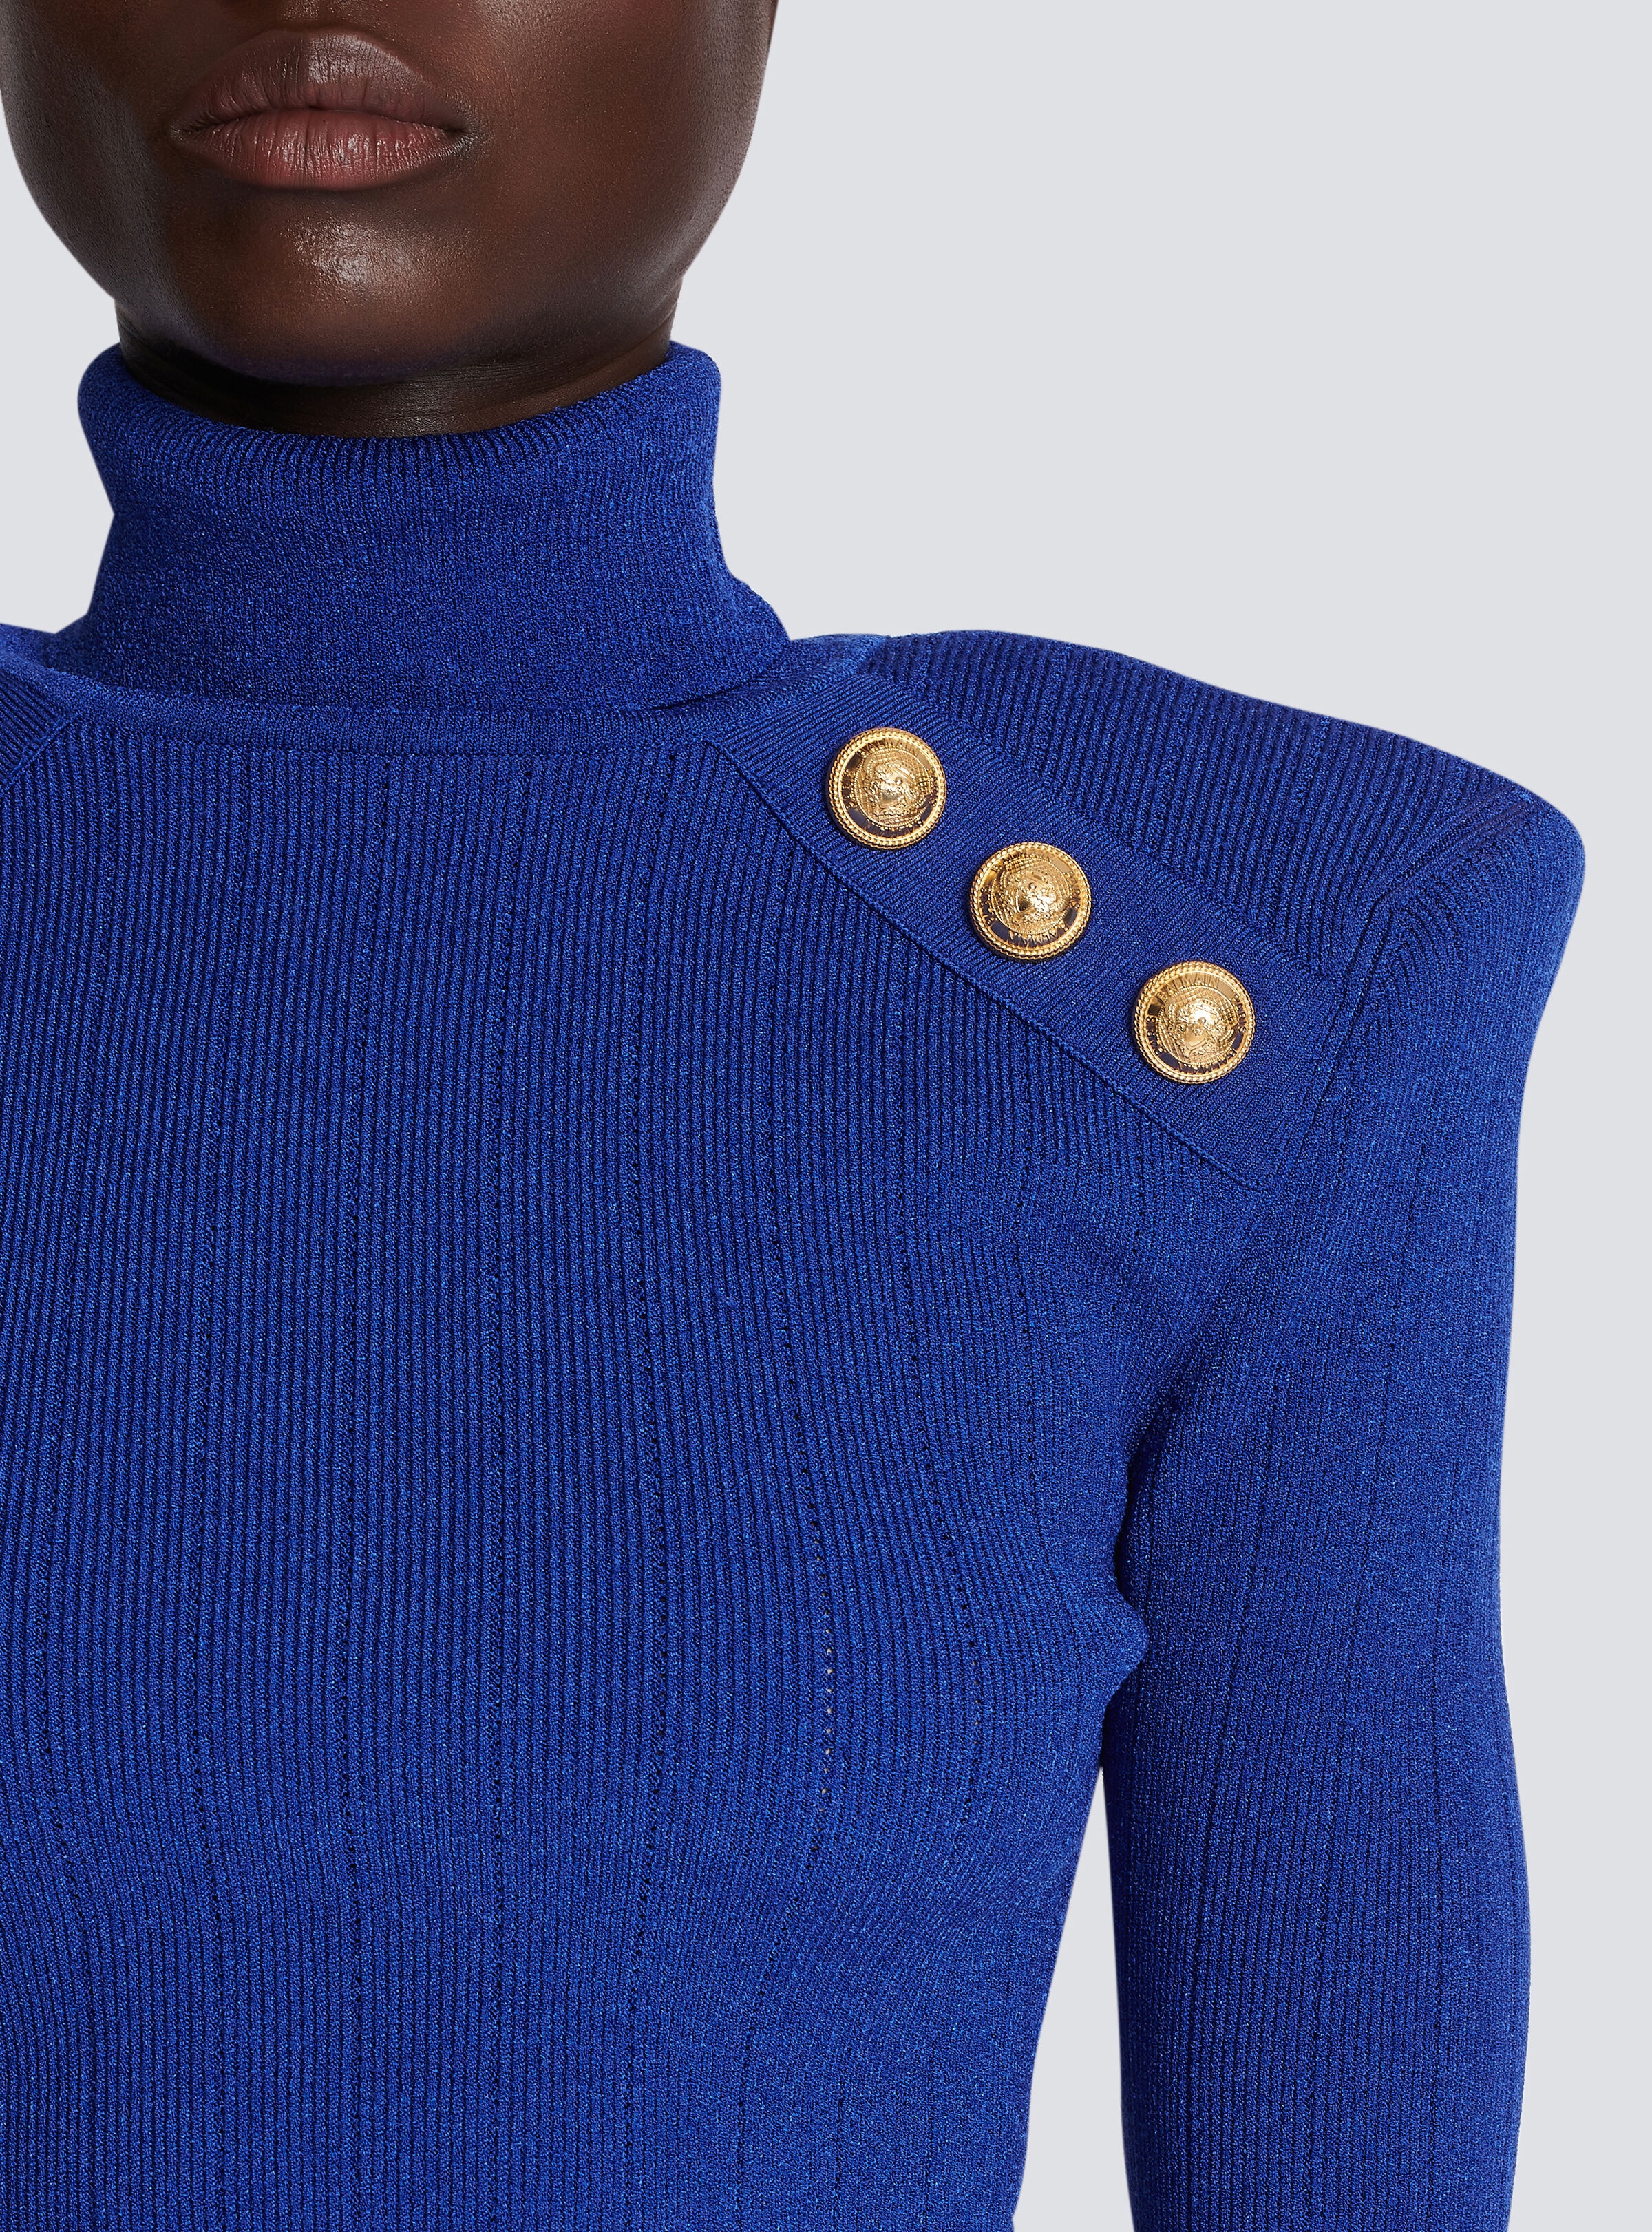 Knit jumper with gold buttons - 6